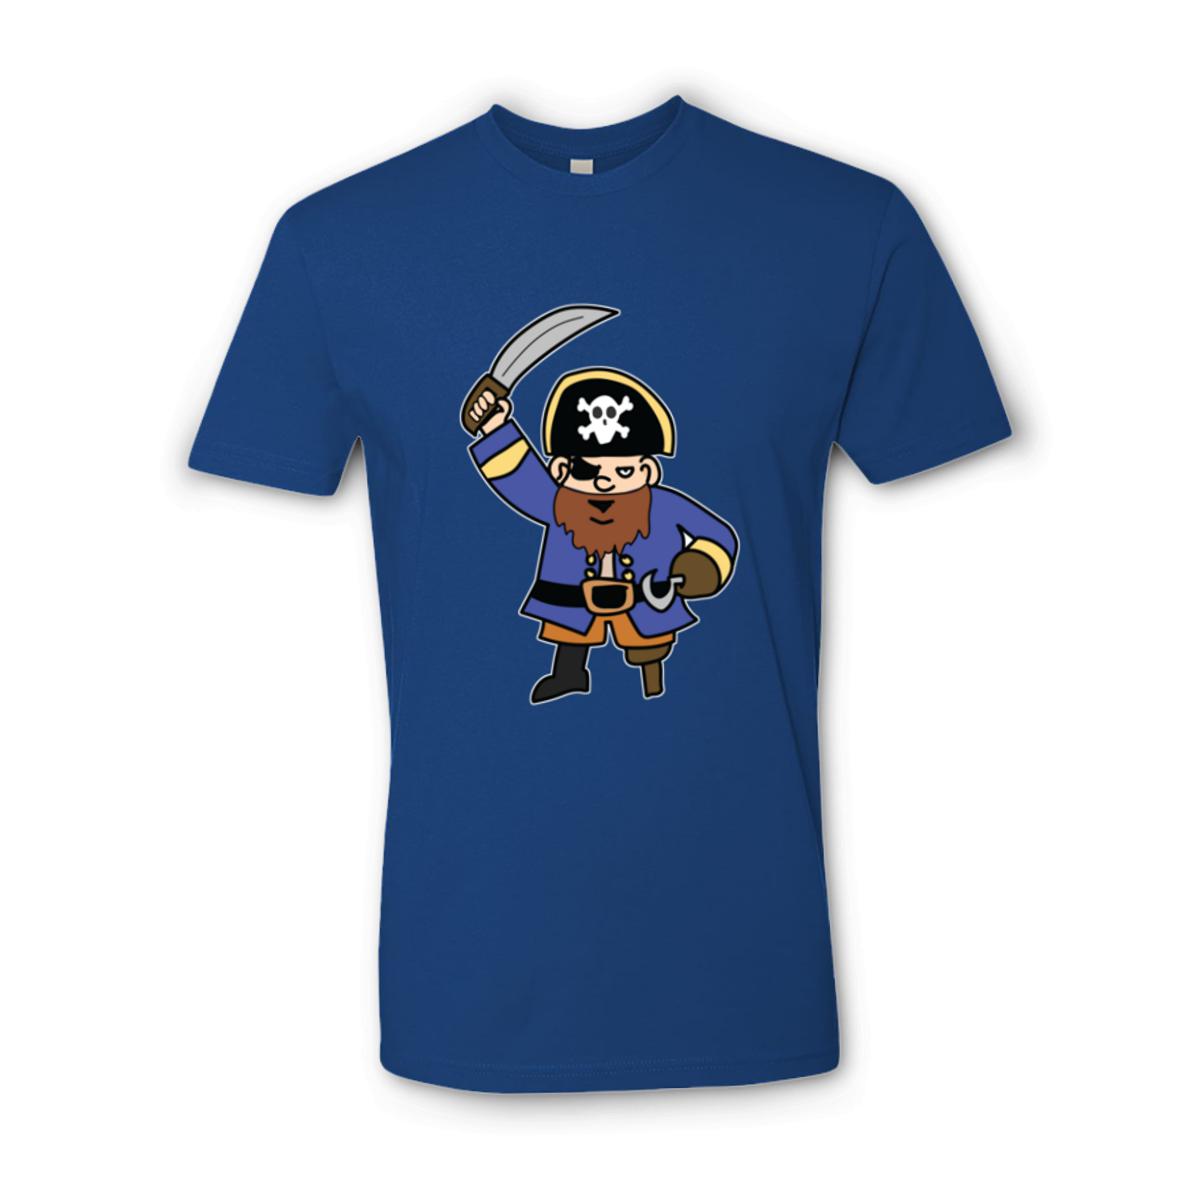 Pirate Unisex Tee Small royal-blue